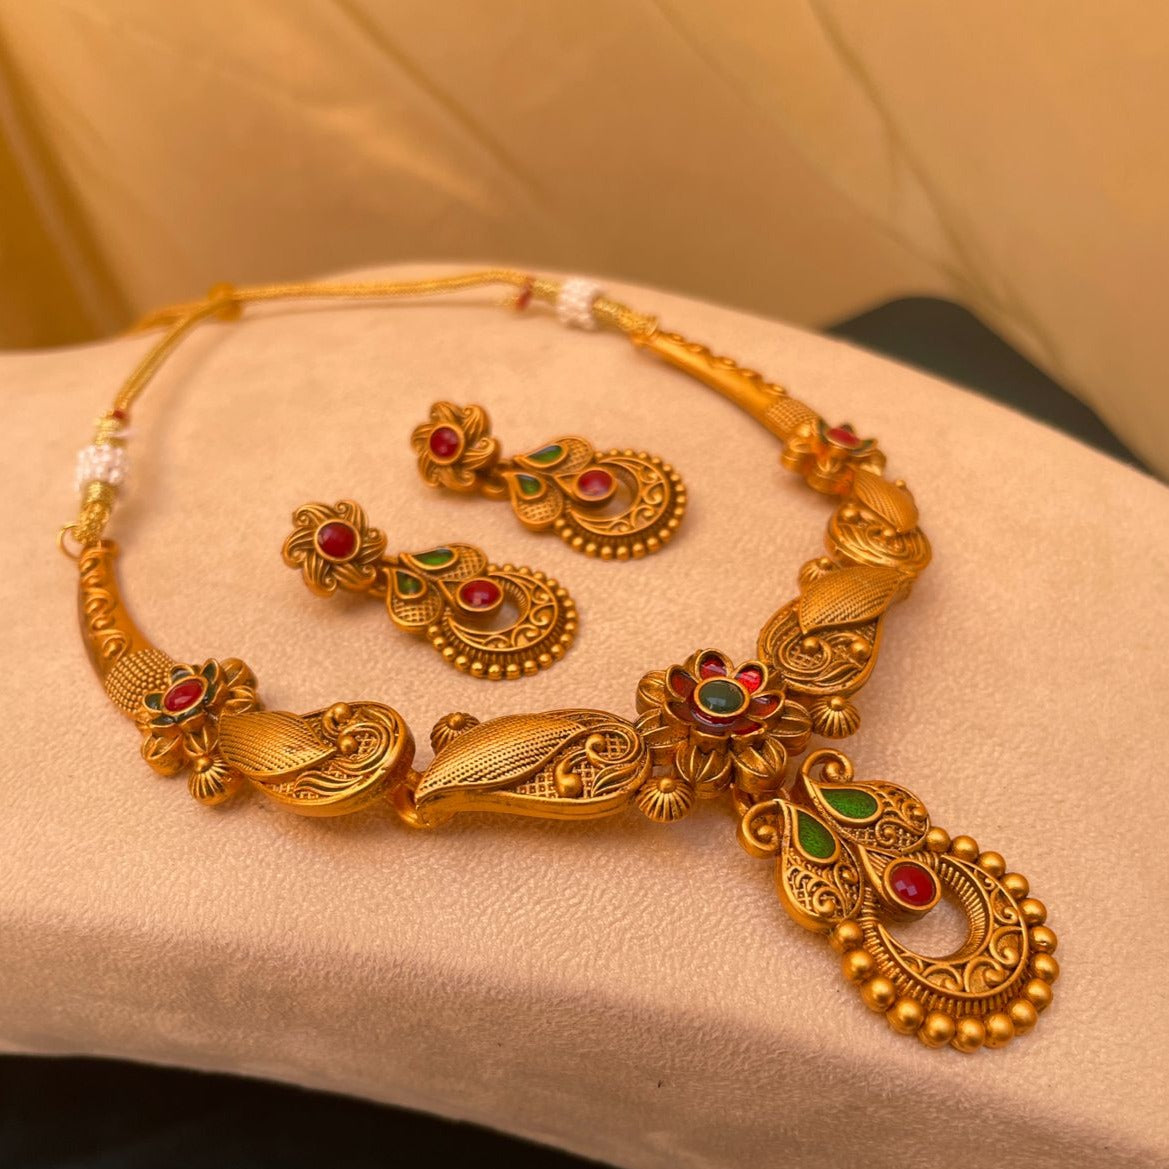 Latest Gold Necklace Designs 2022 | Latest Gold Necklace Designs 2022  #goldneckpiece #goldnecklace #goldnecklaces #goldnecklacedesign | By Niti  FashionFacebook